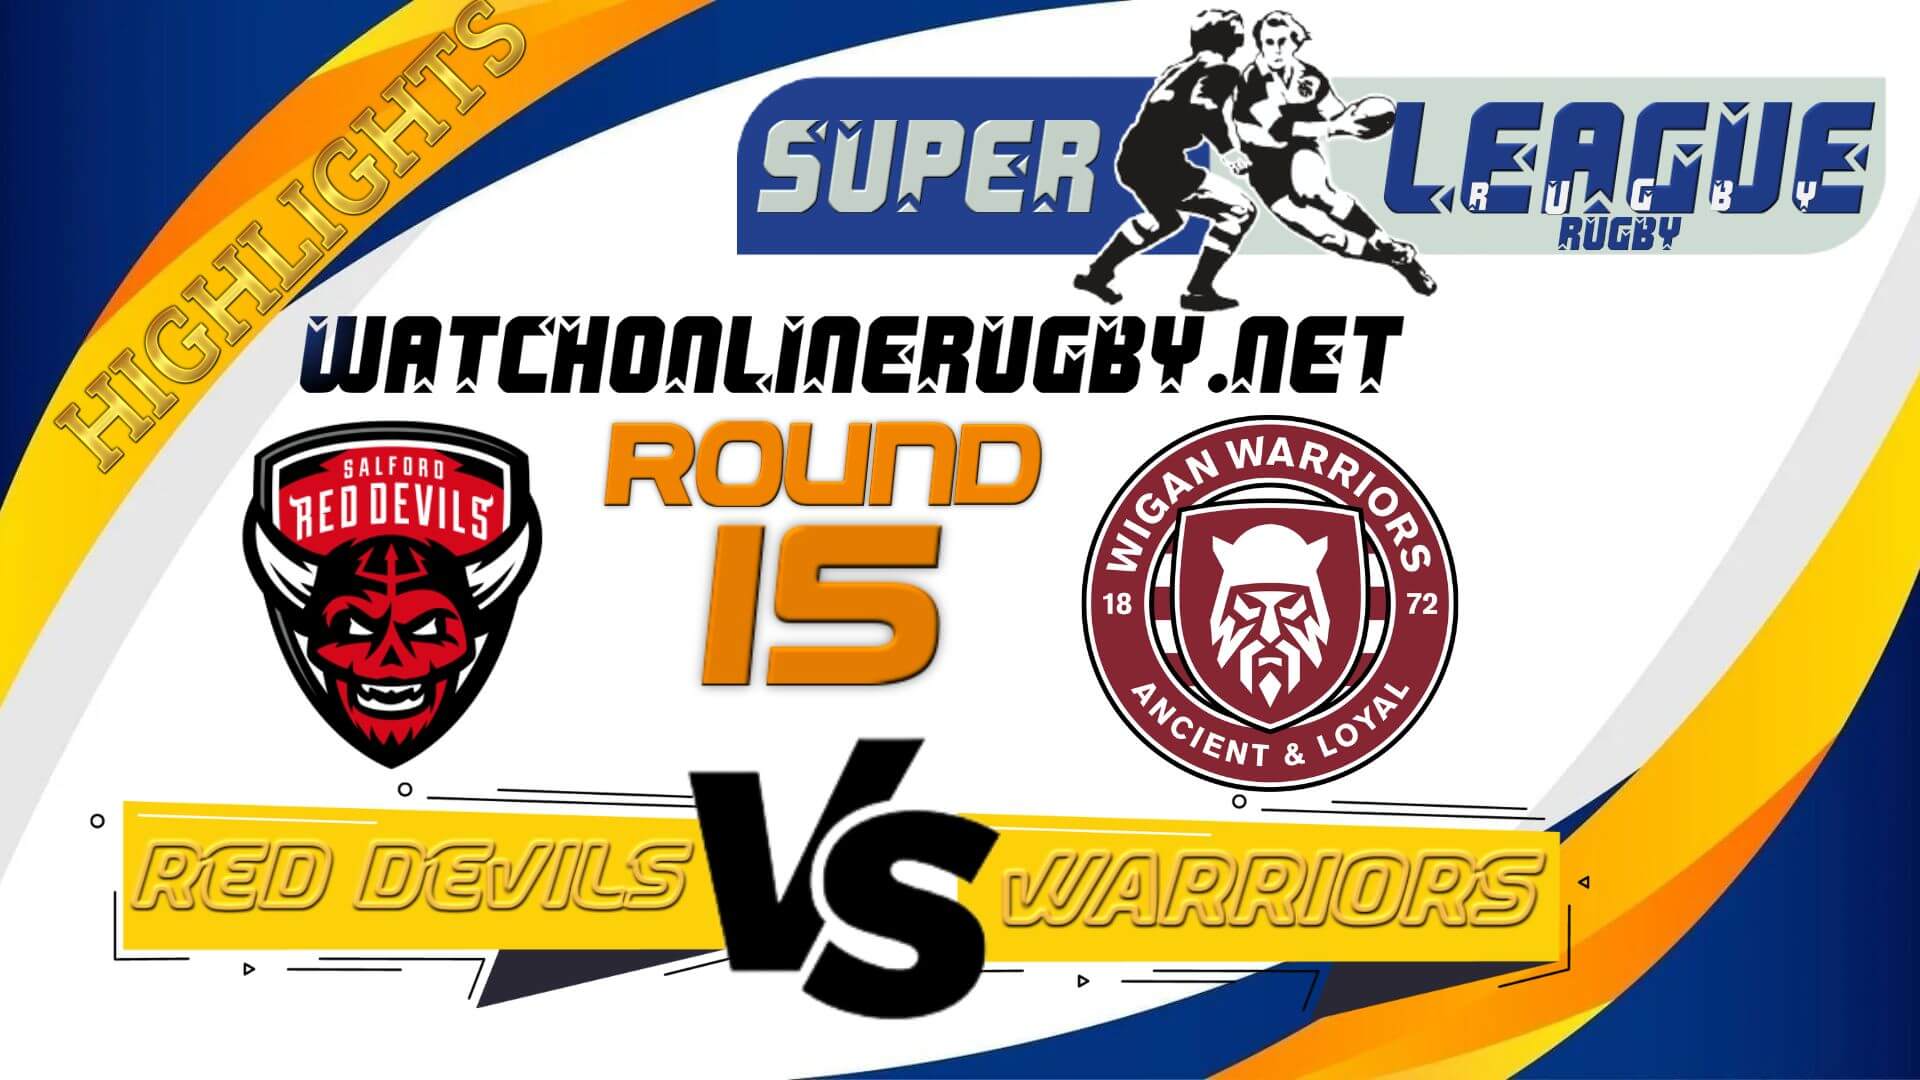 Salford Red Devils Vs Wigan Warriors Super League Rugby 2022 RD 15